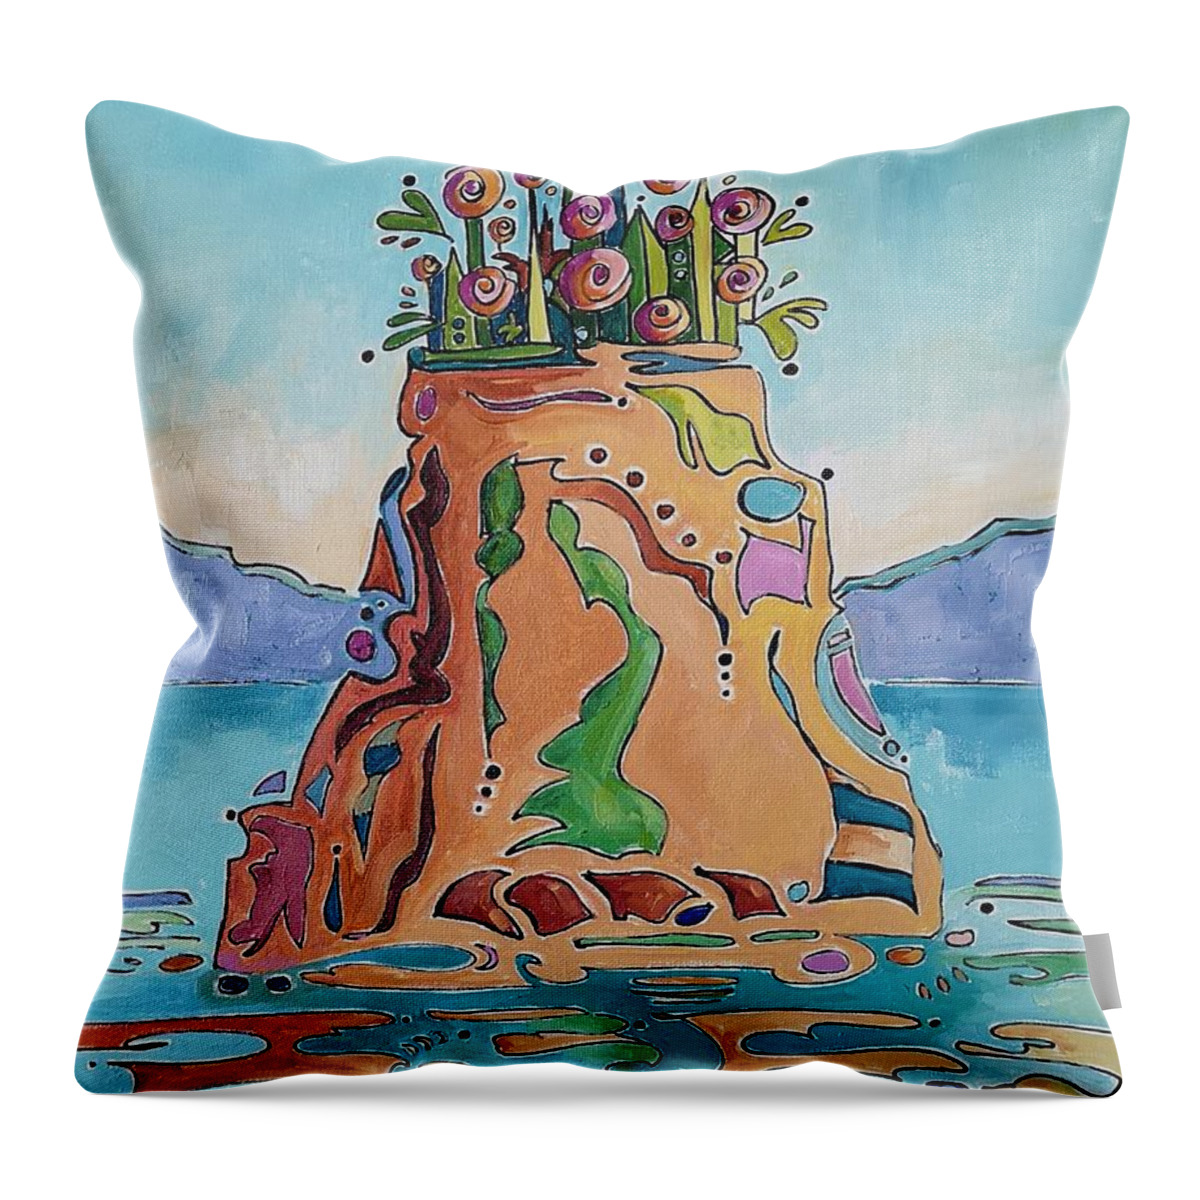 Landscape Throw Pillow featuring the painting Flowerpot Island by Sheila Romard